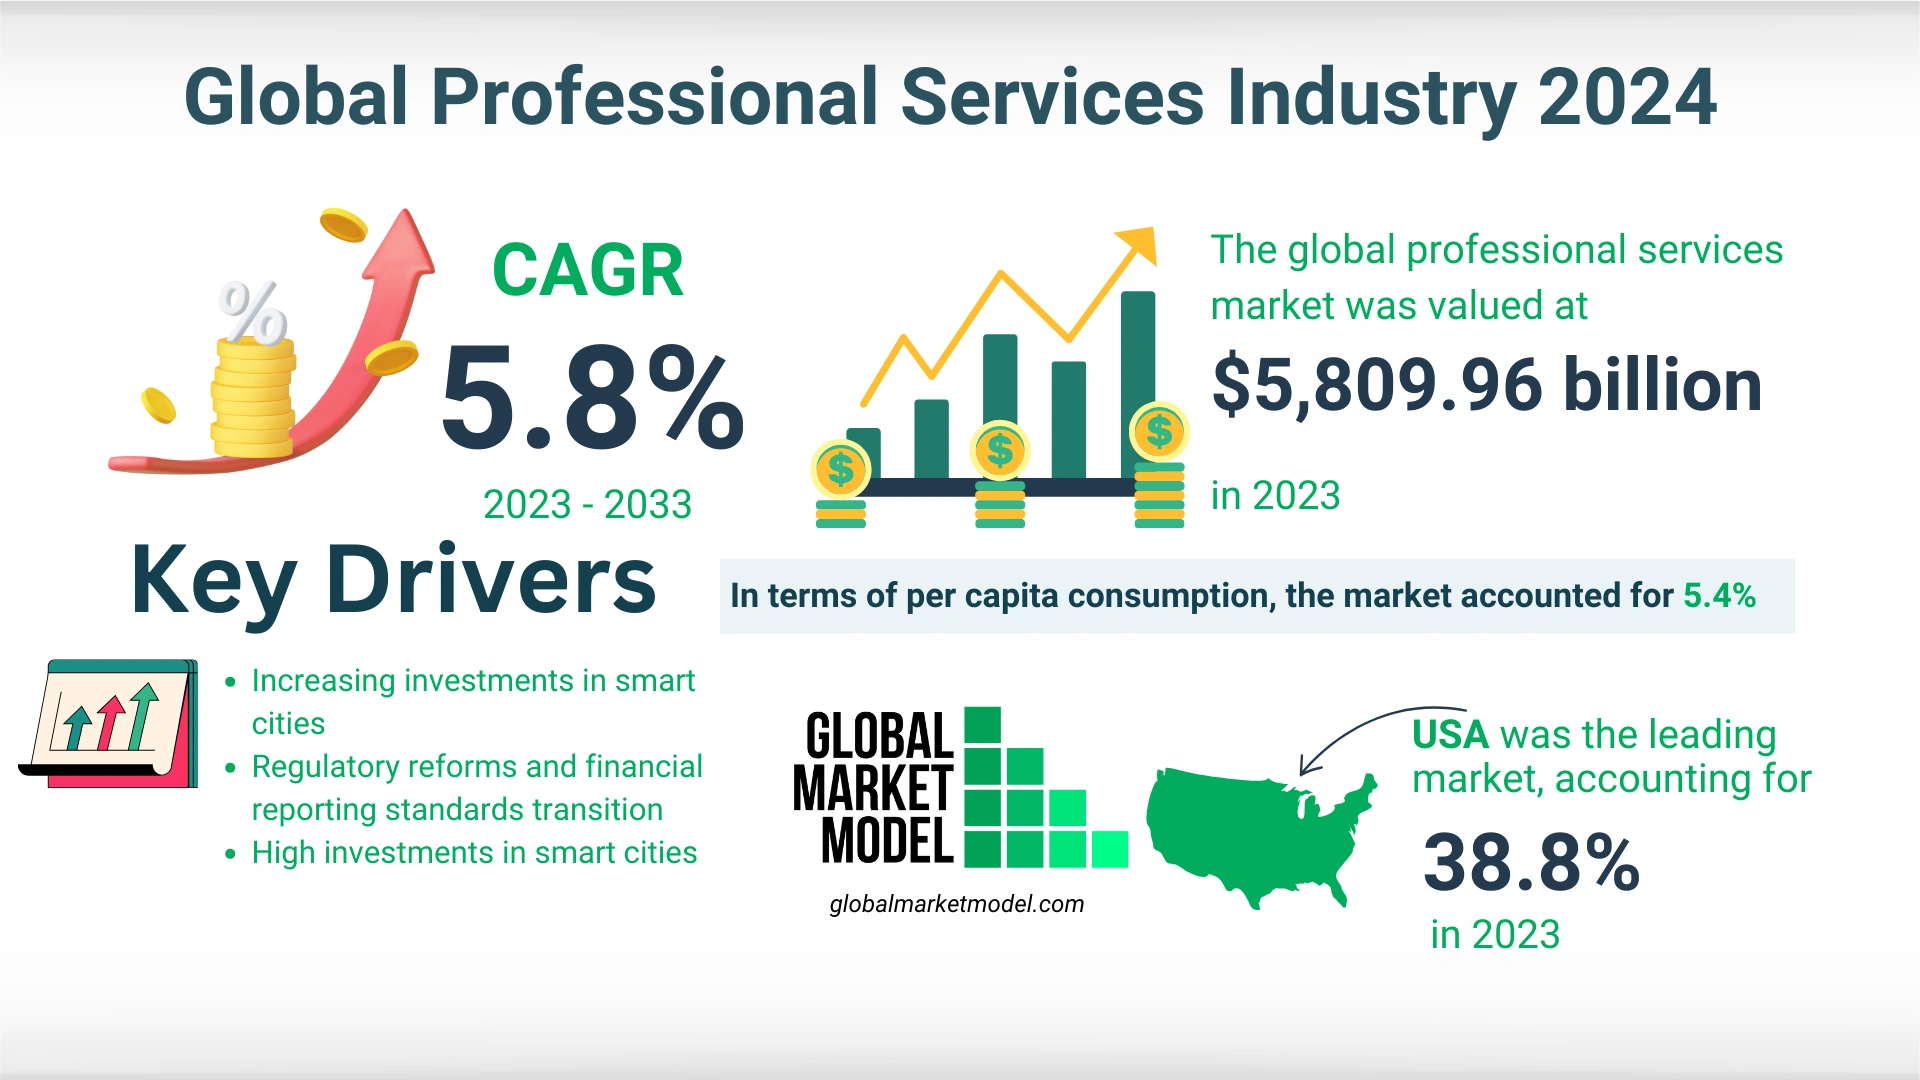  Professional Services Industry Overview 2024